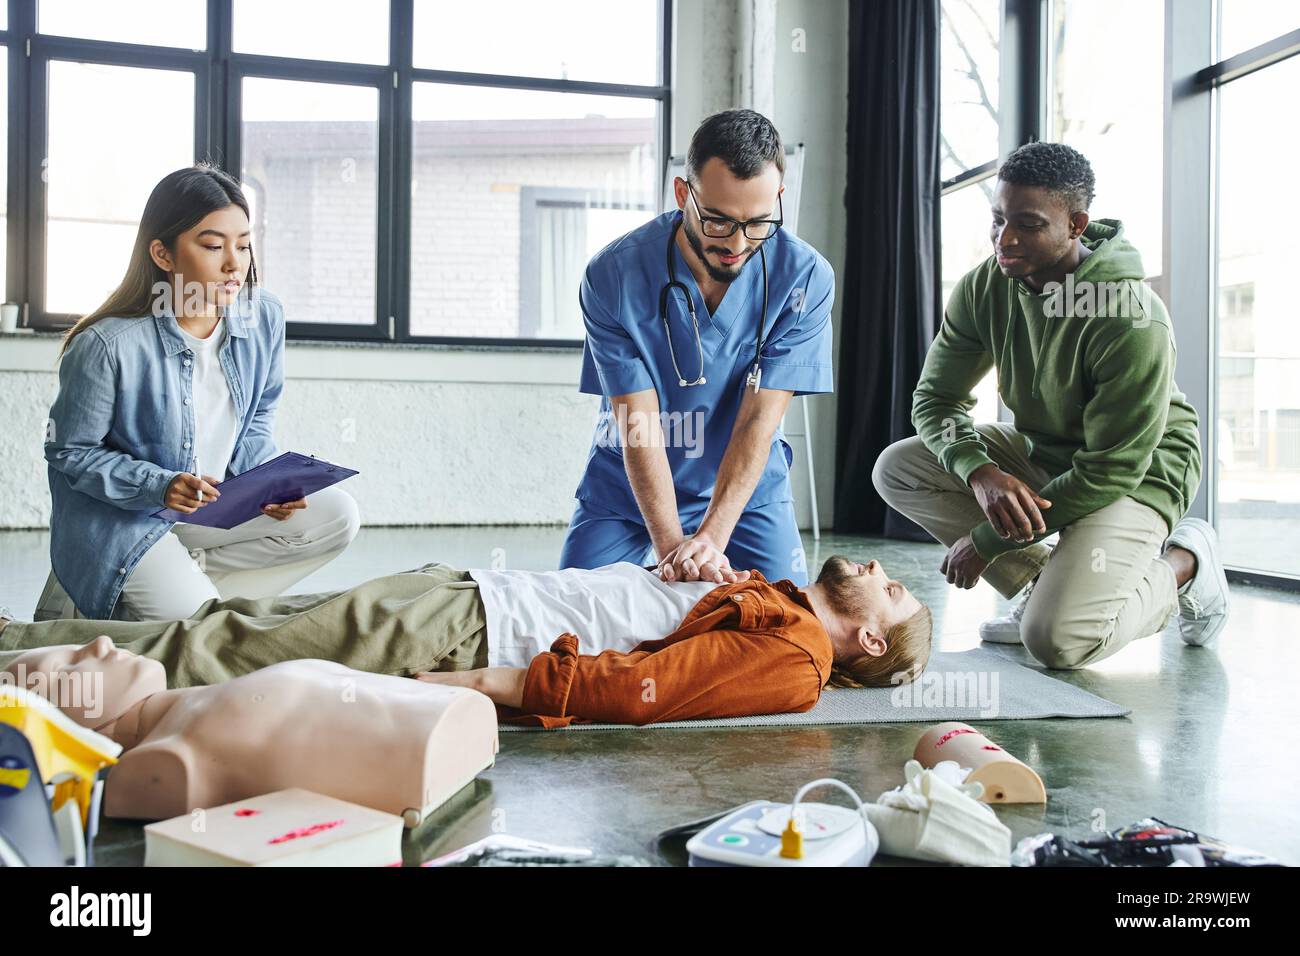 professional paramedic practicing chest compressions on man near CPR manikin, medical equipment and multiethnic participants of first aid training sem Stock Photo